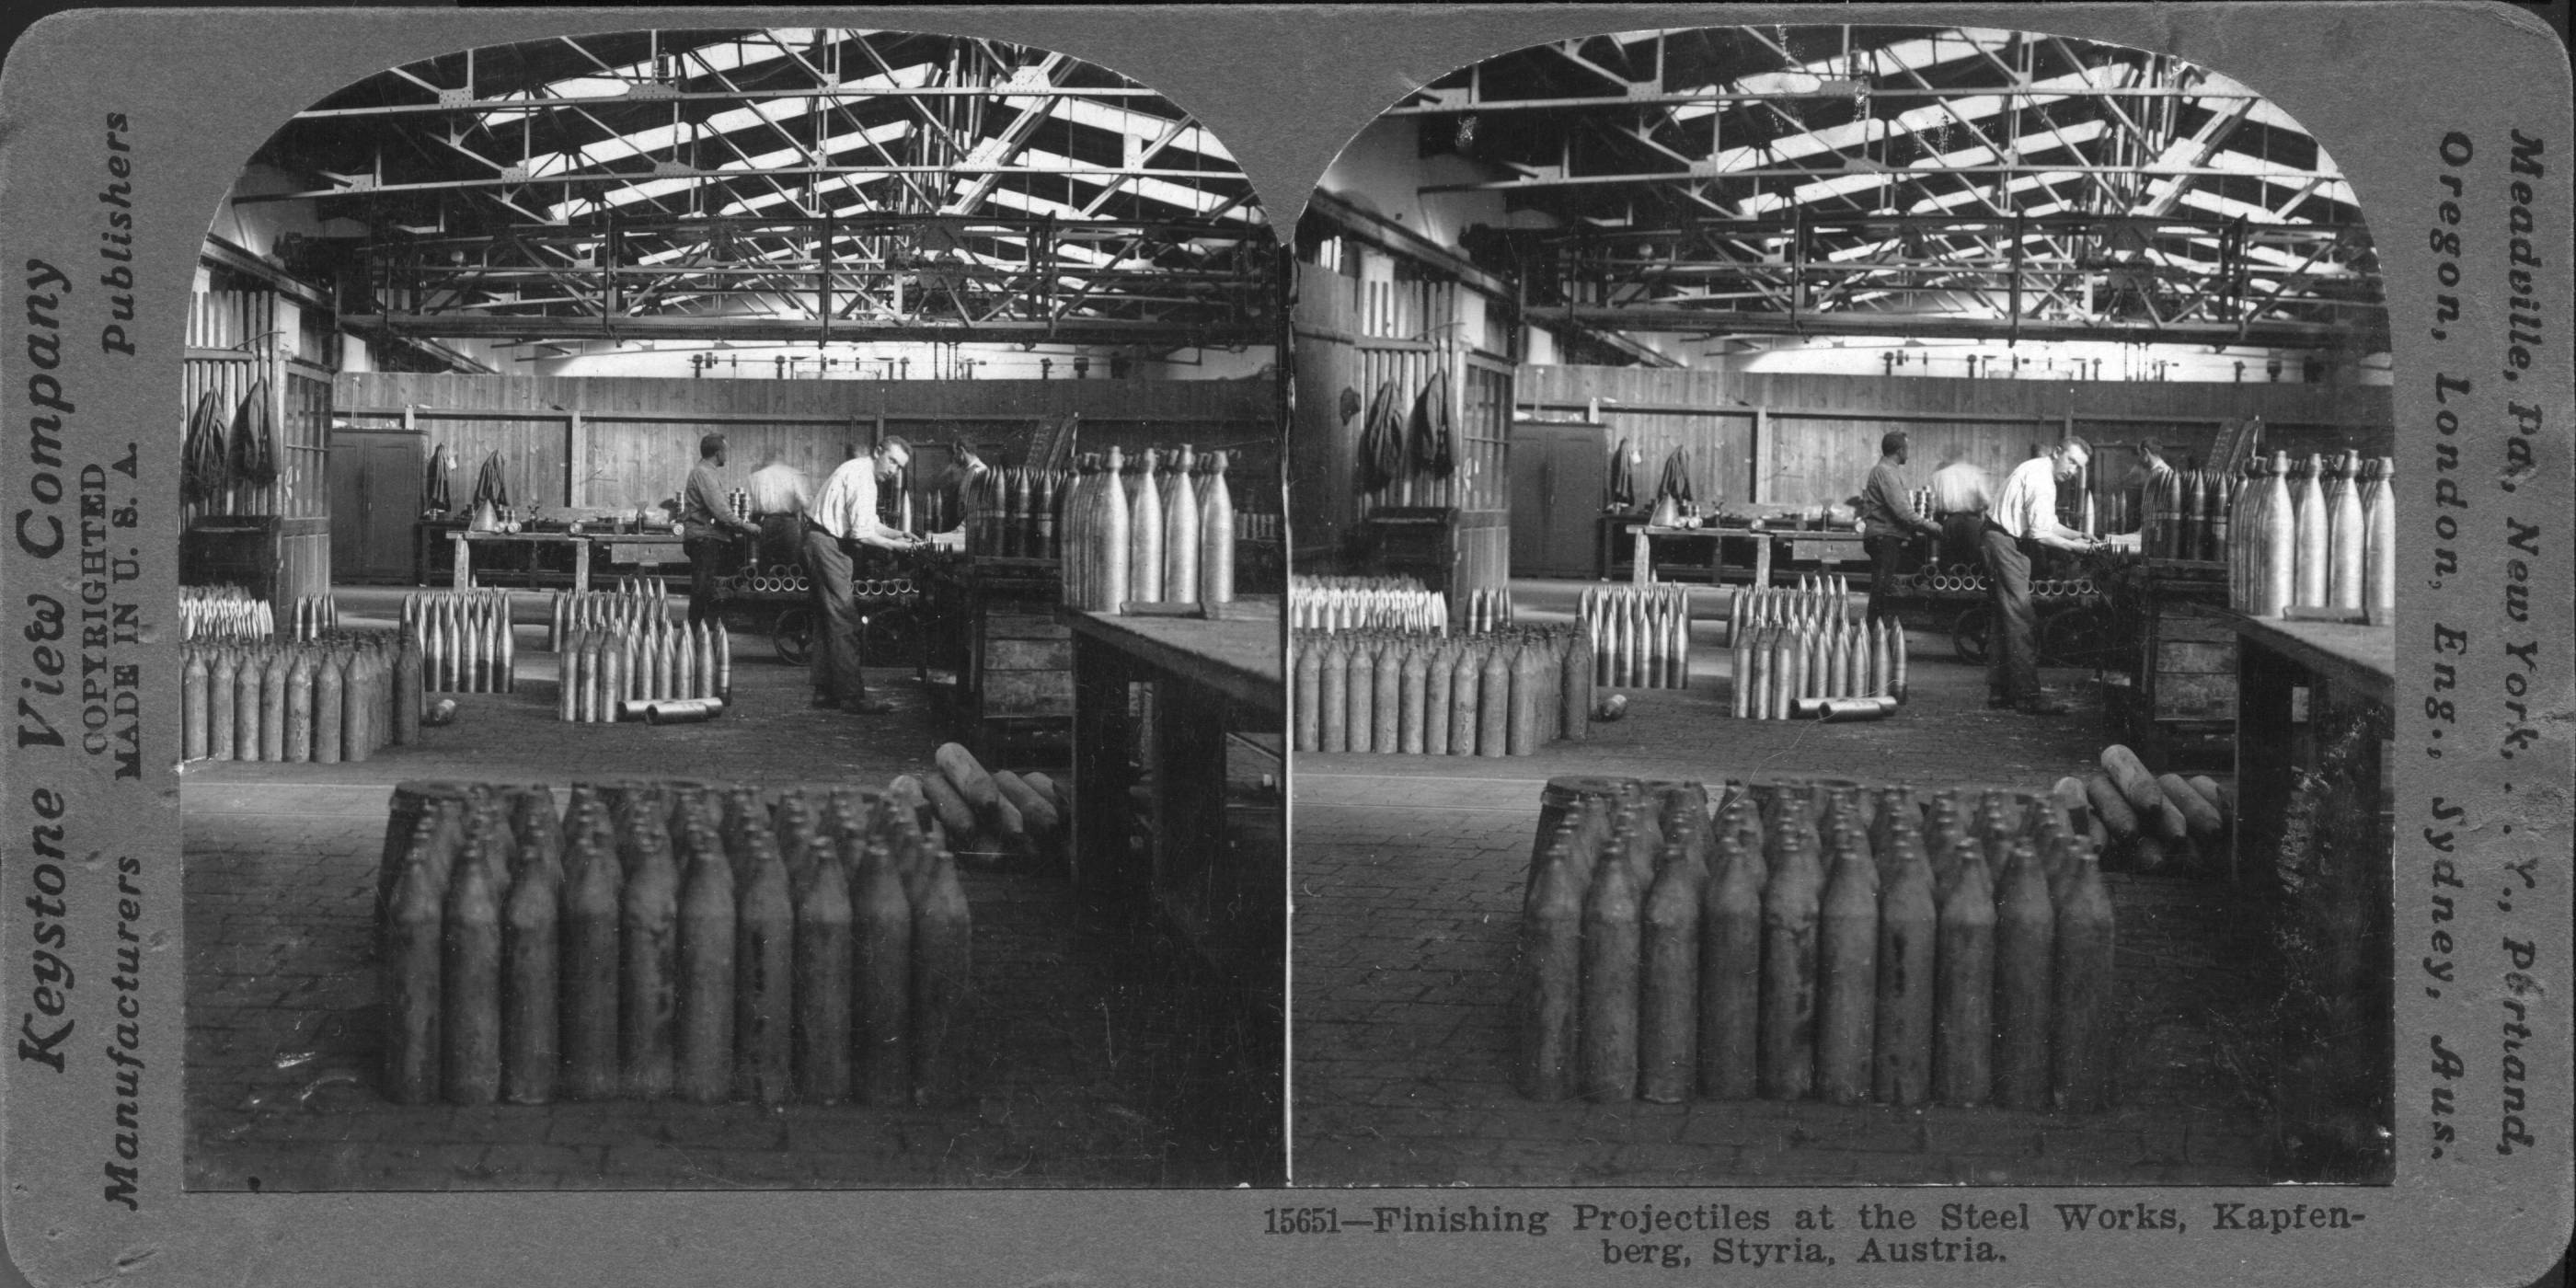 Finishing Projectiles at the Steel Works, Kapfenberg, Styria, Austria